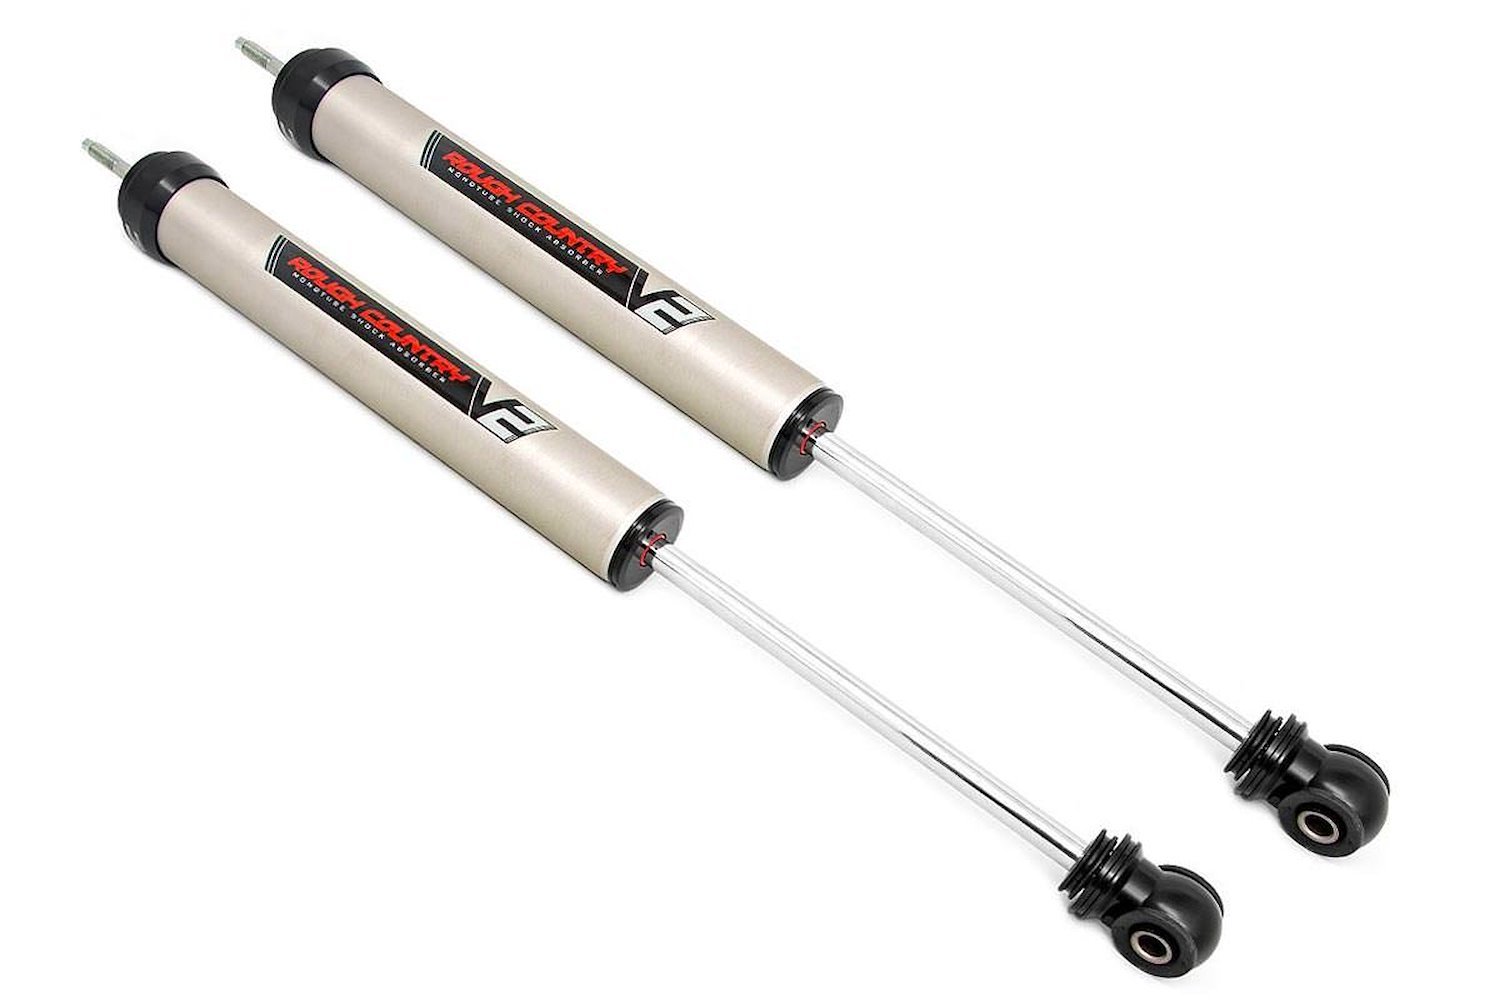 760767_C Toyota Tacoma 2wd (05-20) V2 Rear Monotube Shock Absorbers (Pair) 6.5-8"